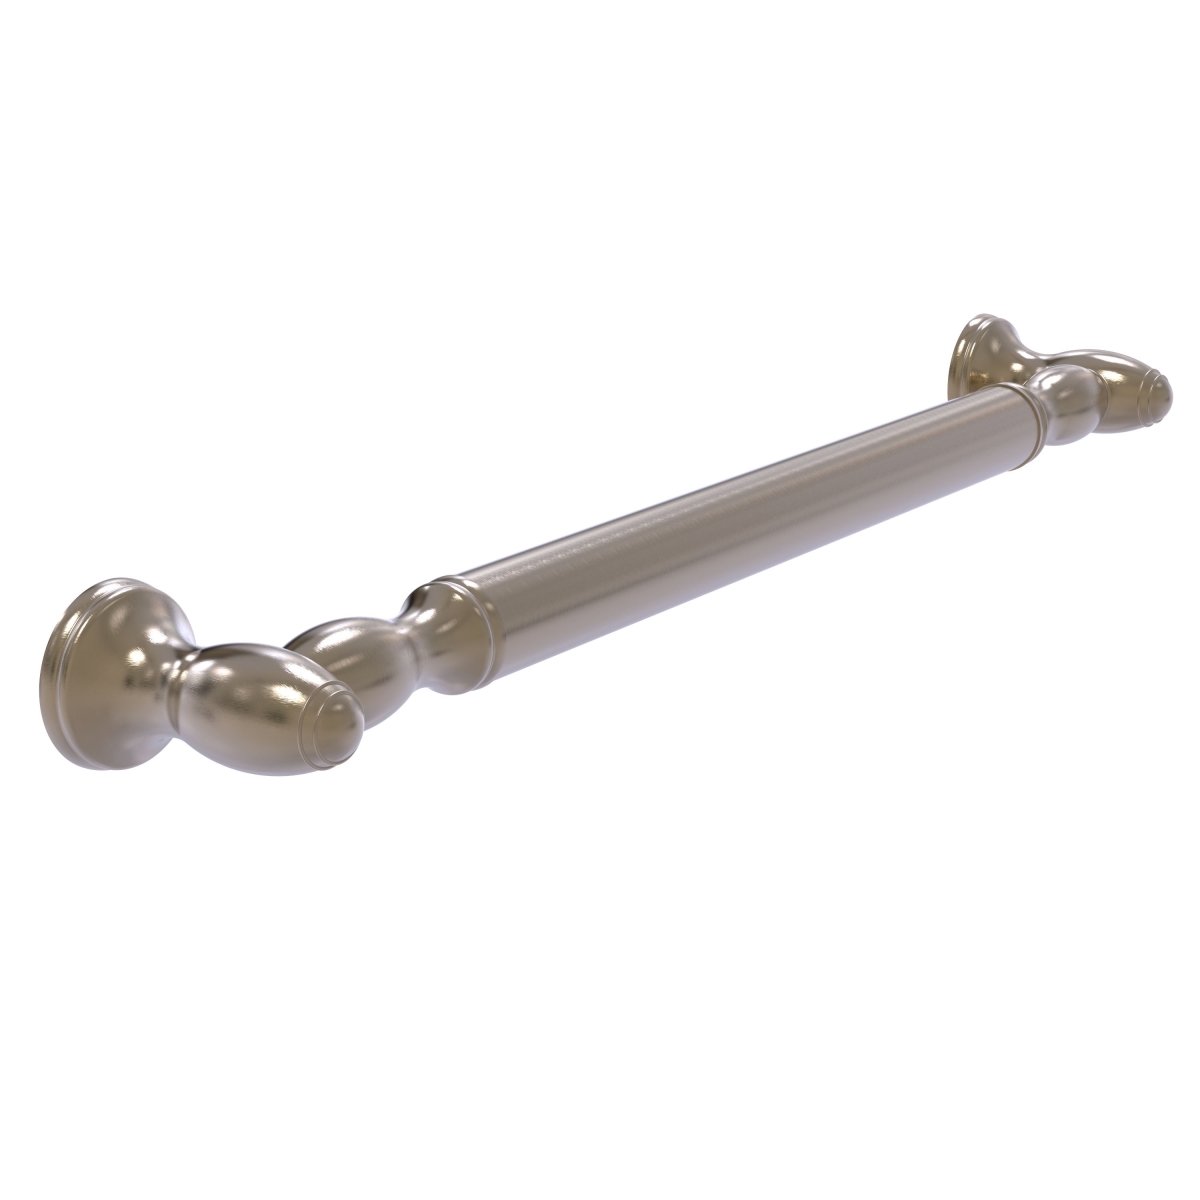 Picture of Allied Brass TD-GRS-24-PEW 24 in. Grab Bar Smooth, Antique Pewter - 3.5 x 26 x 24 in.